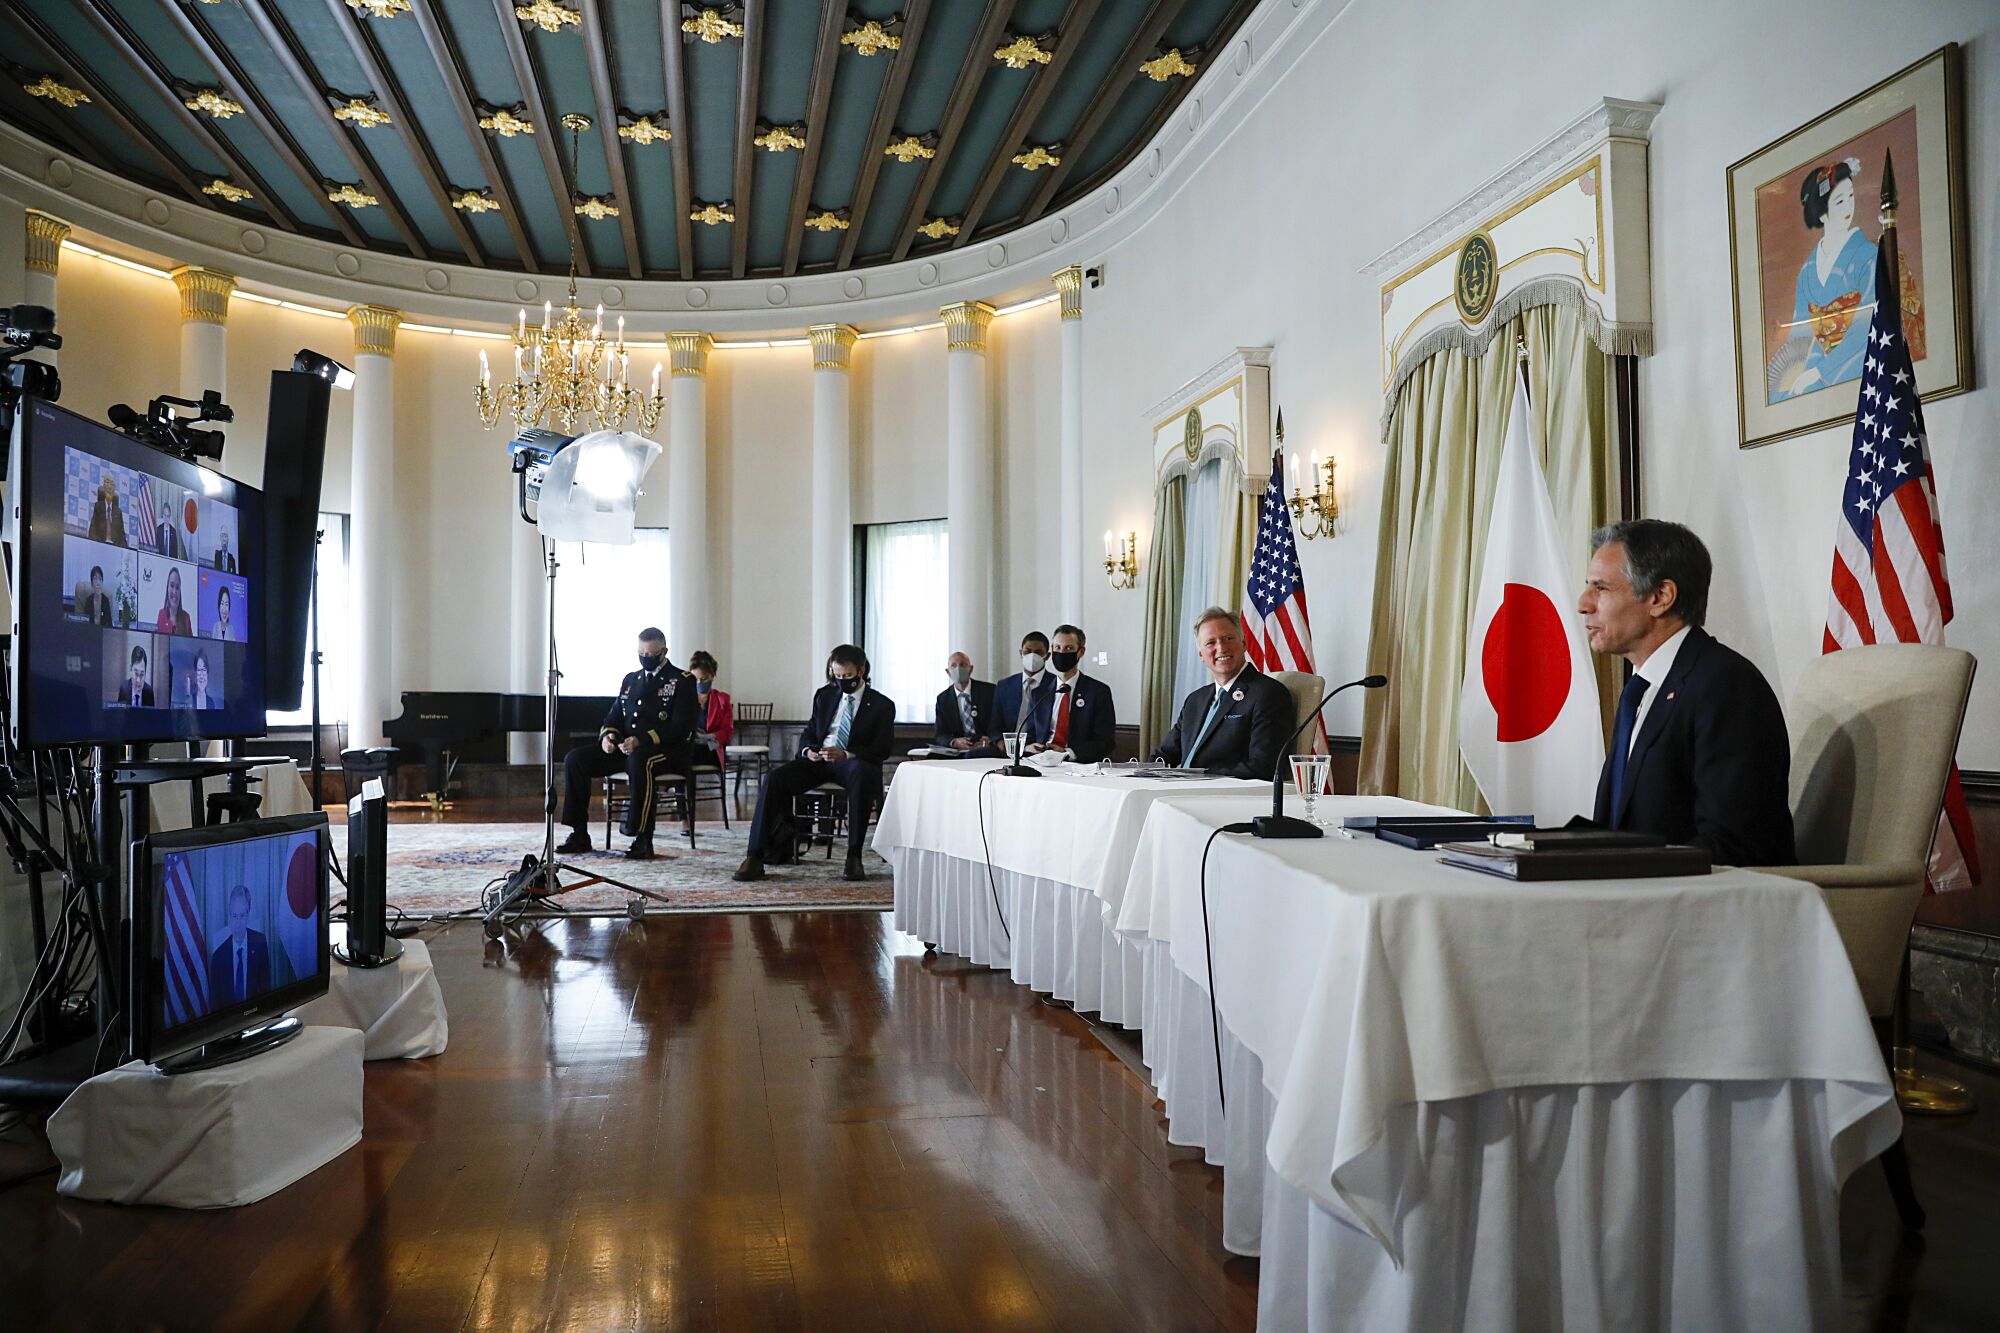 Secretary of State Antony J. Blinken, right, and other officials are seated apart, with U.S. and Japanese flags behind them